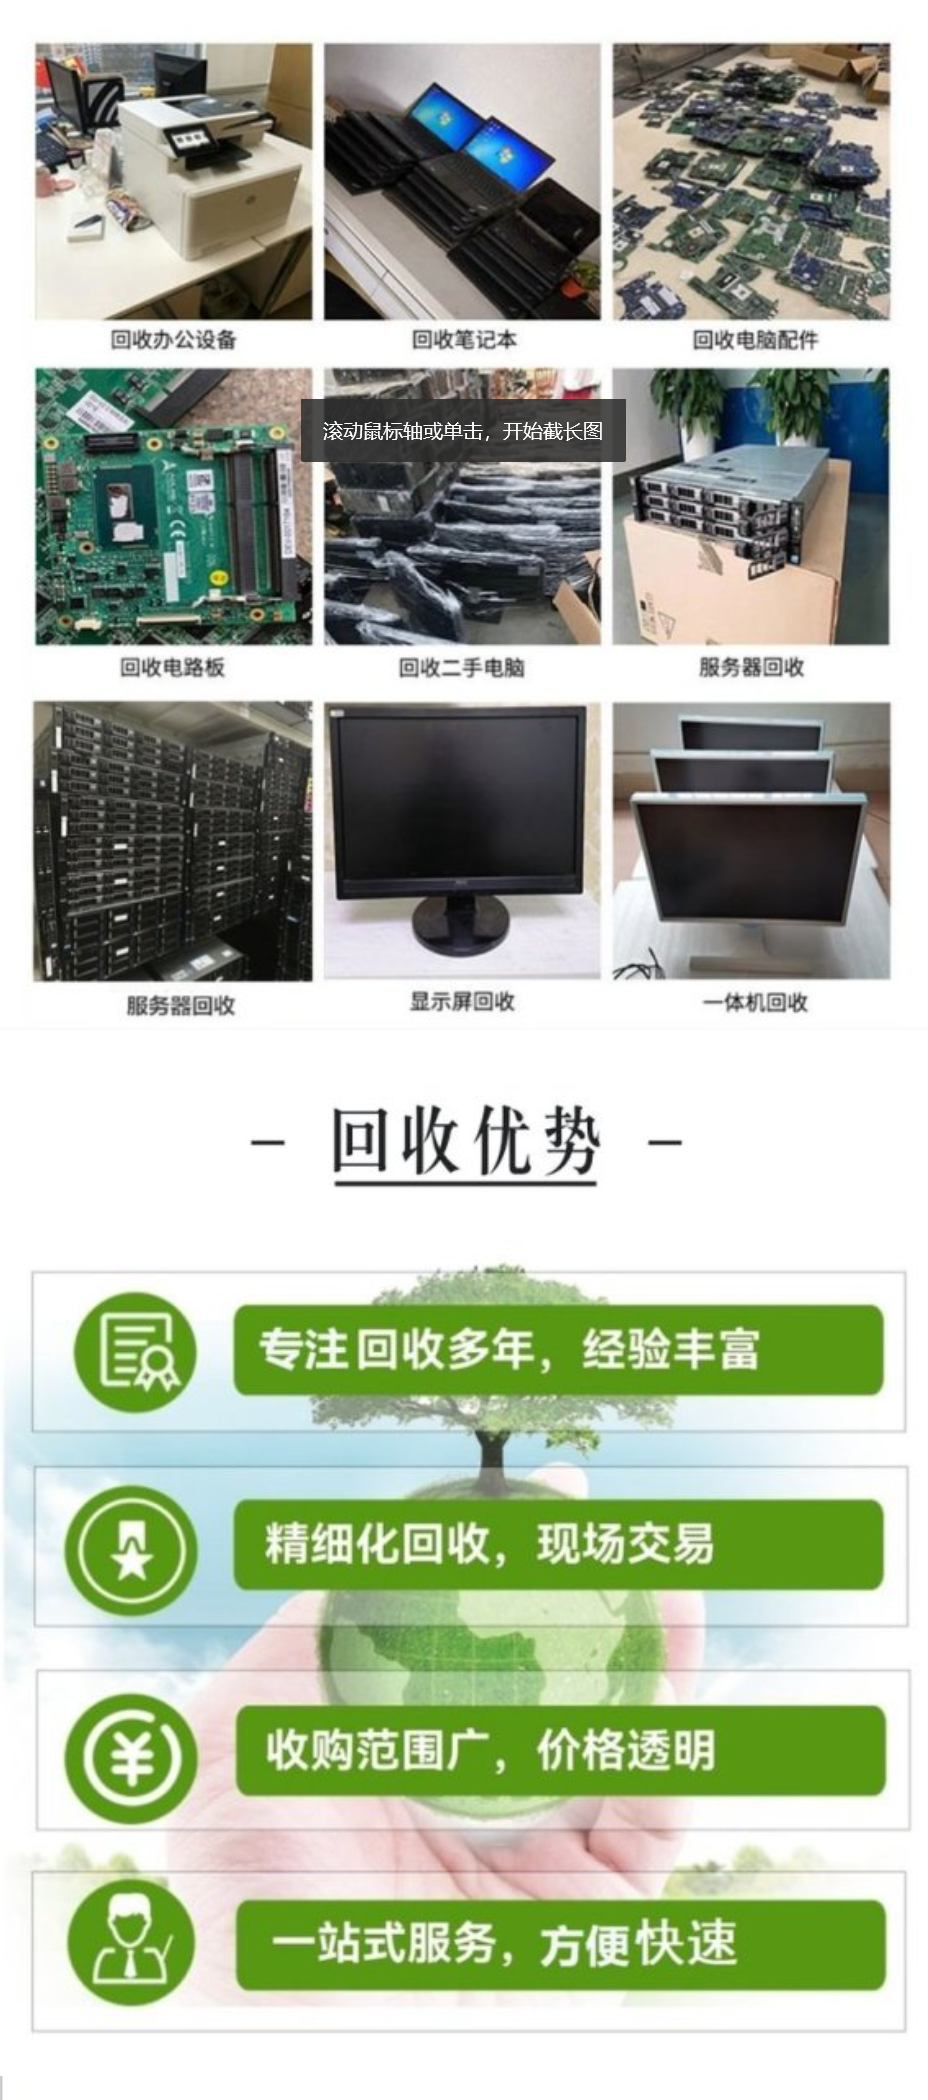 Recycling of Used Computers, Collecting Used Mobile Phones, Renting Laptops, Office, and Free Deposit Apple All in One Machine